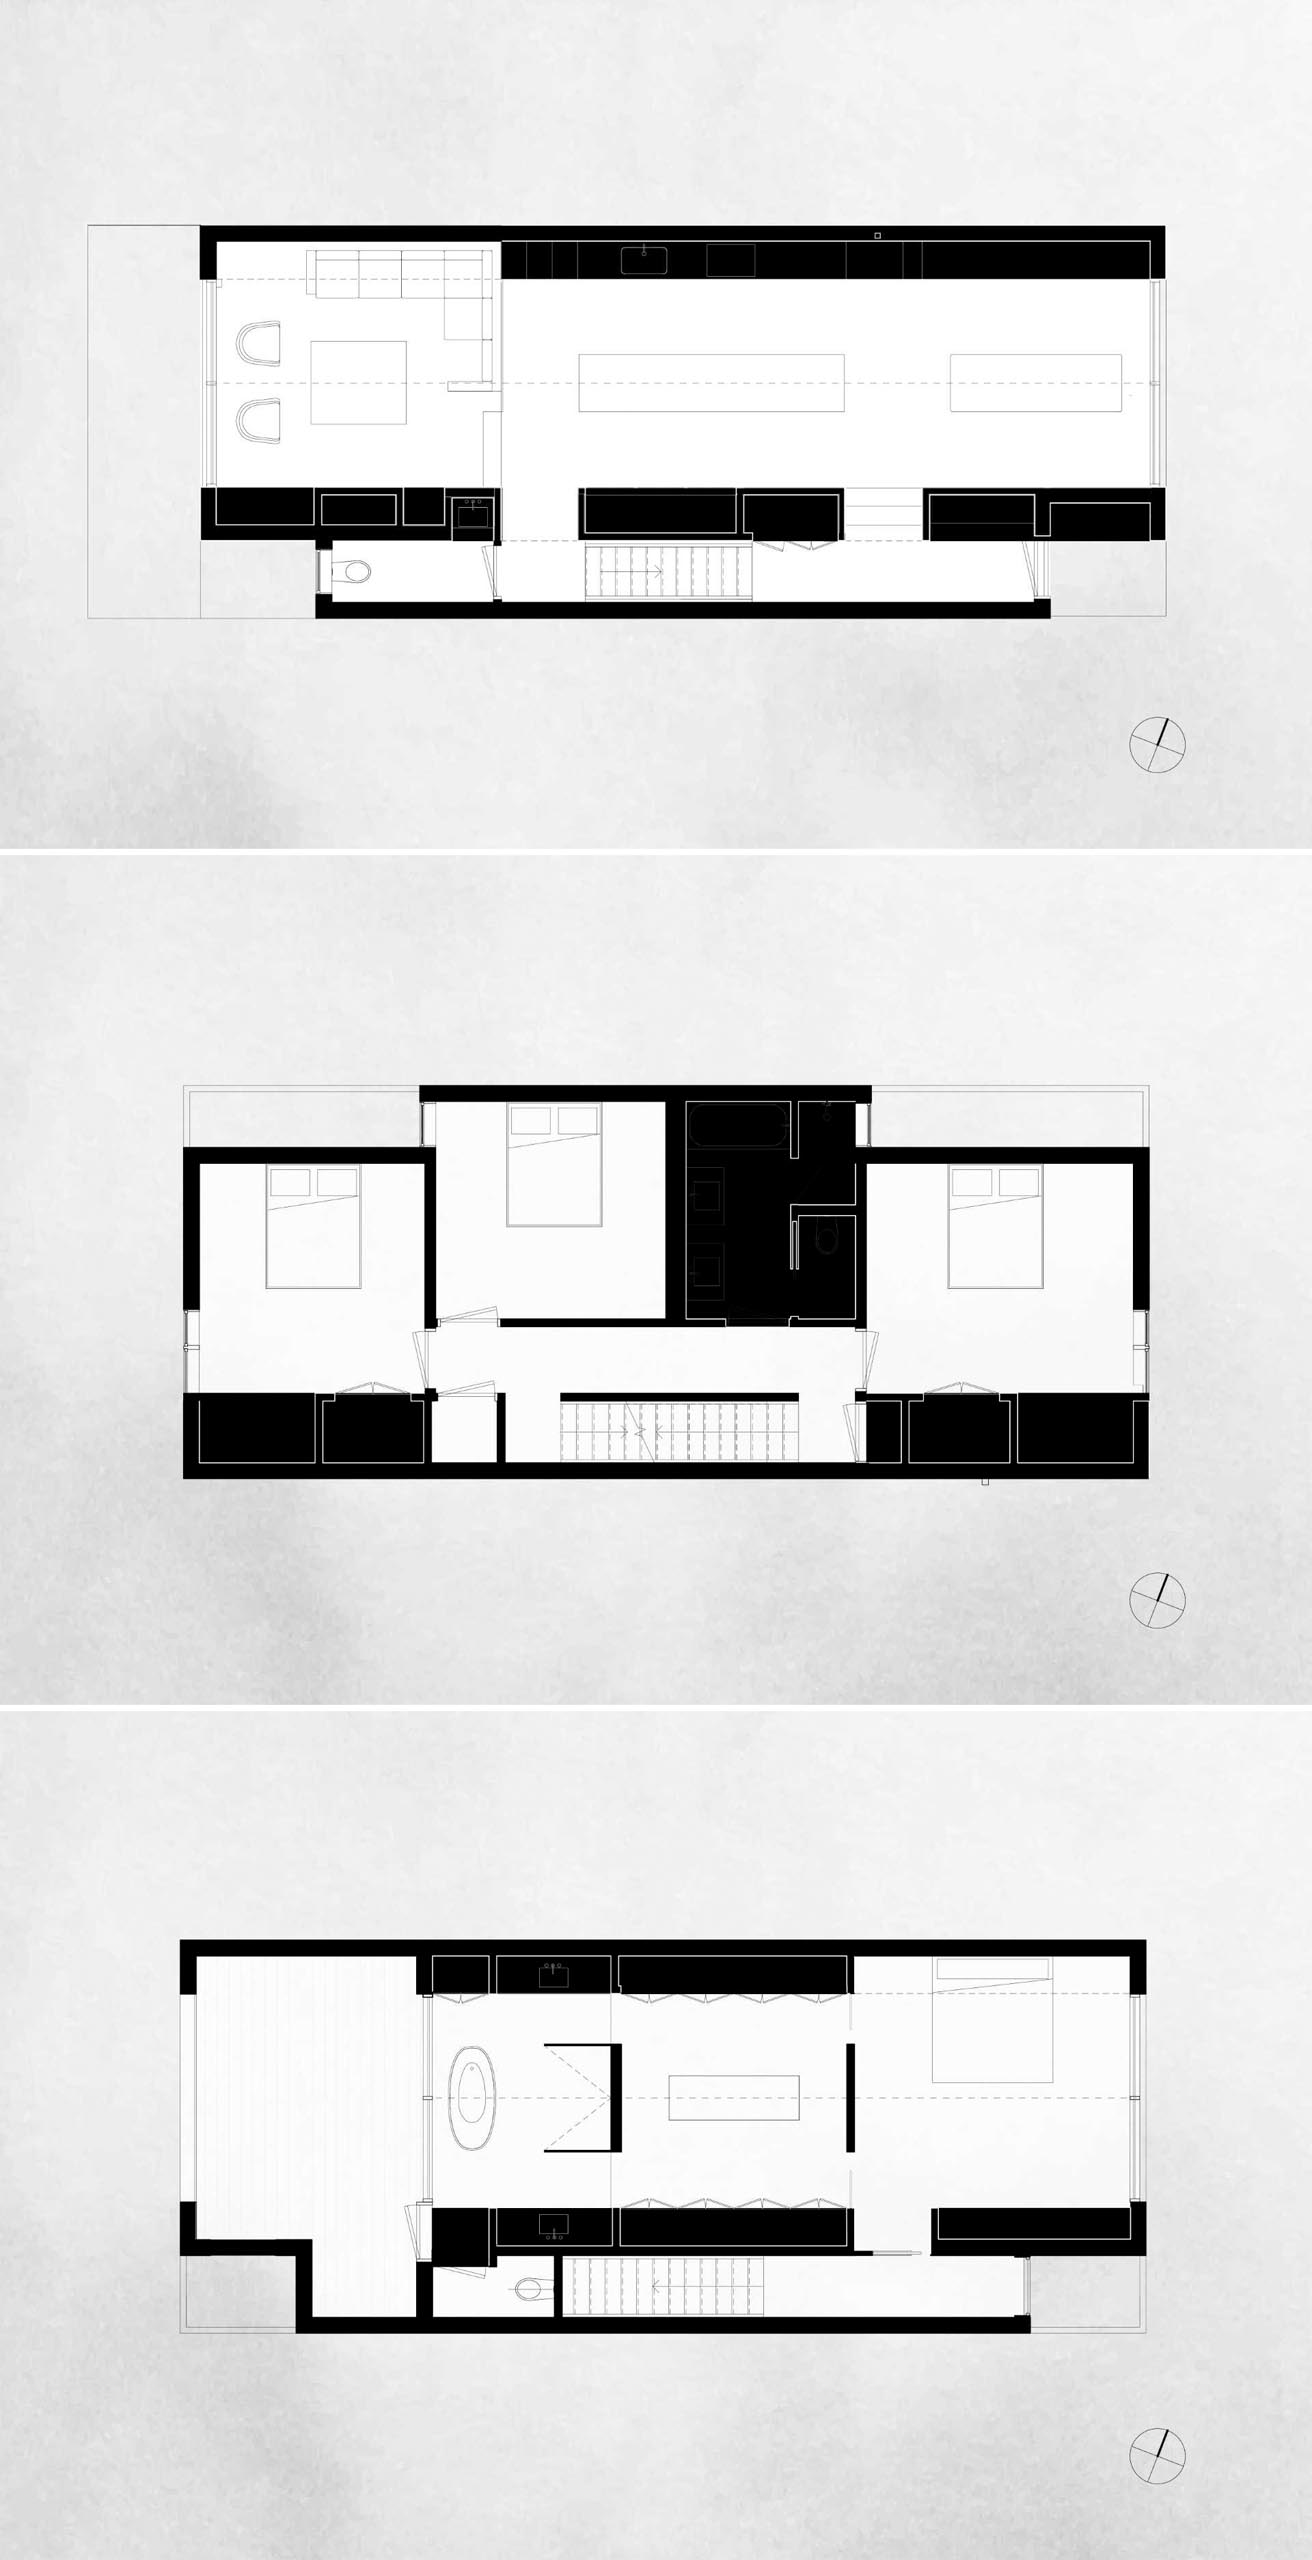 The floor plans of a modern 3 storey home.